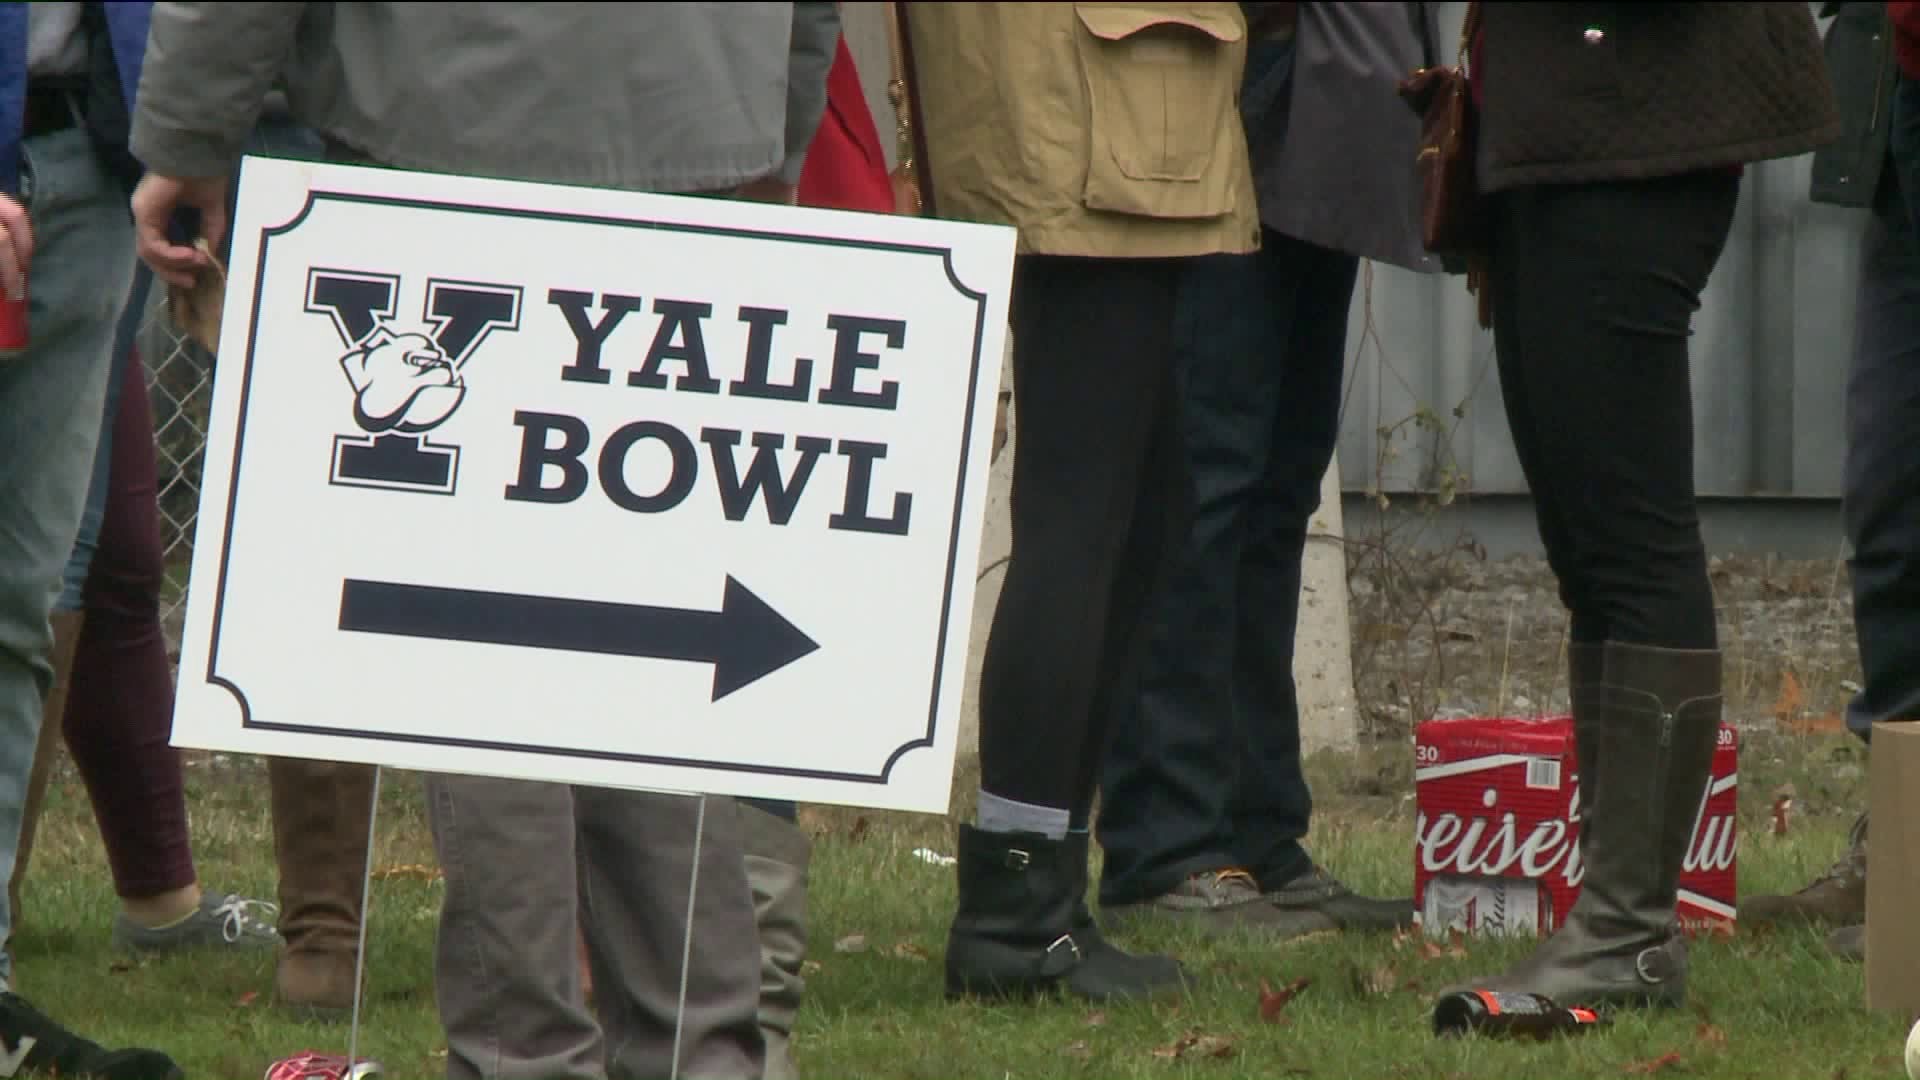 Stricter tailgating rules enforced in New Haven for Yale-Harvard